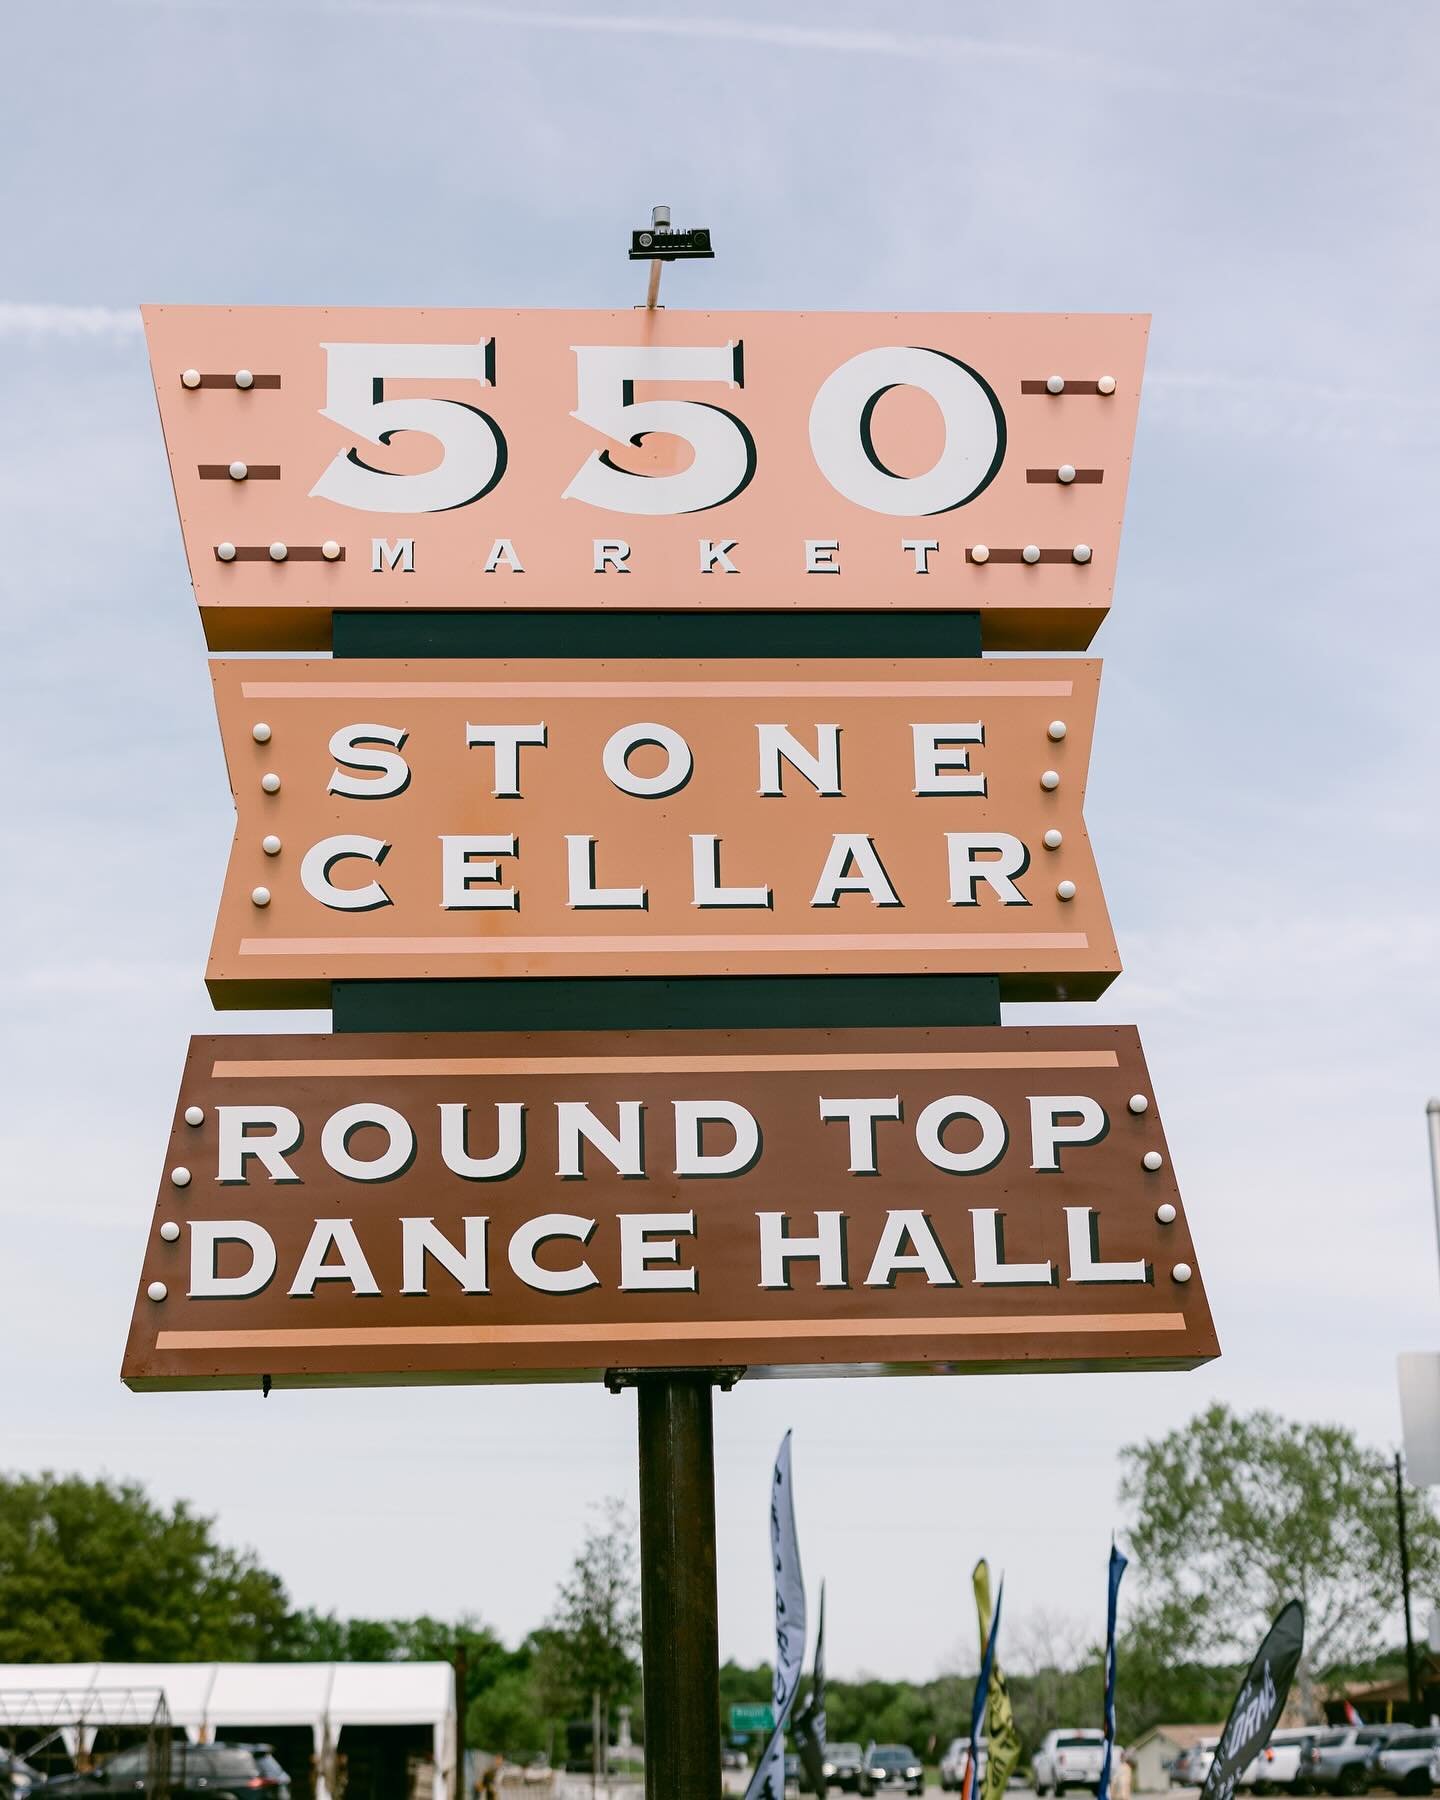 Calling all music lovers! The One Square Mile music festival is happening in Round Top at @the550district from April 18-21, featuring Jack Ingram and other amazing talent. This is the perfect opportunity for an exciting getaway, and we&rsquo;d love t